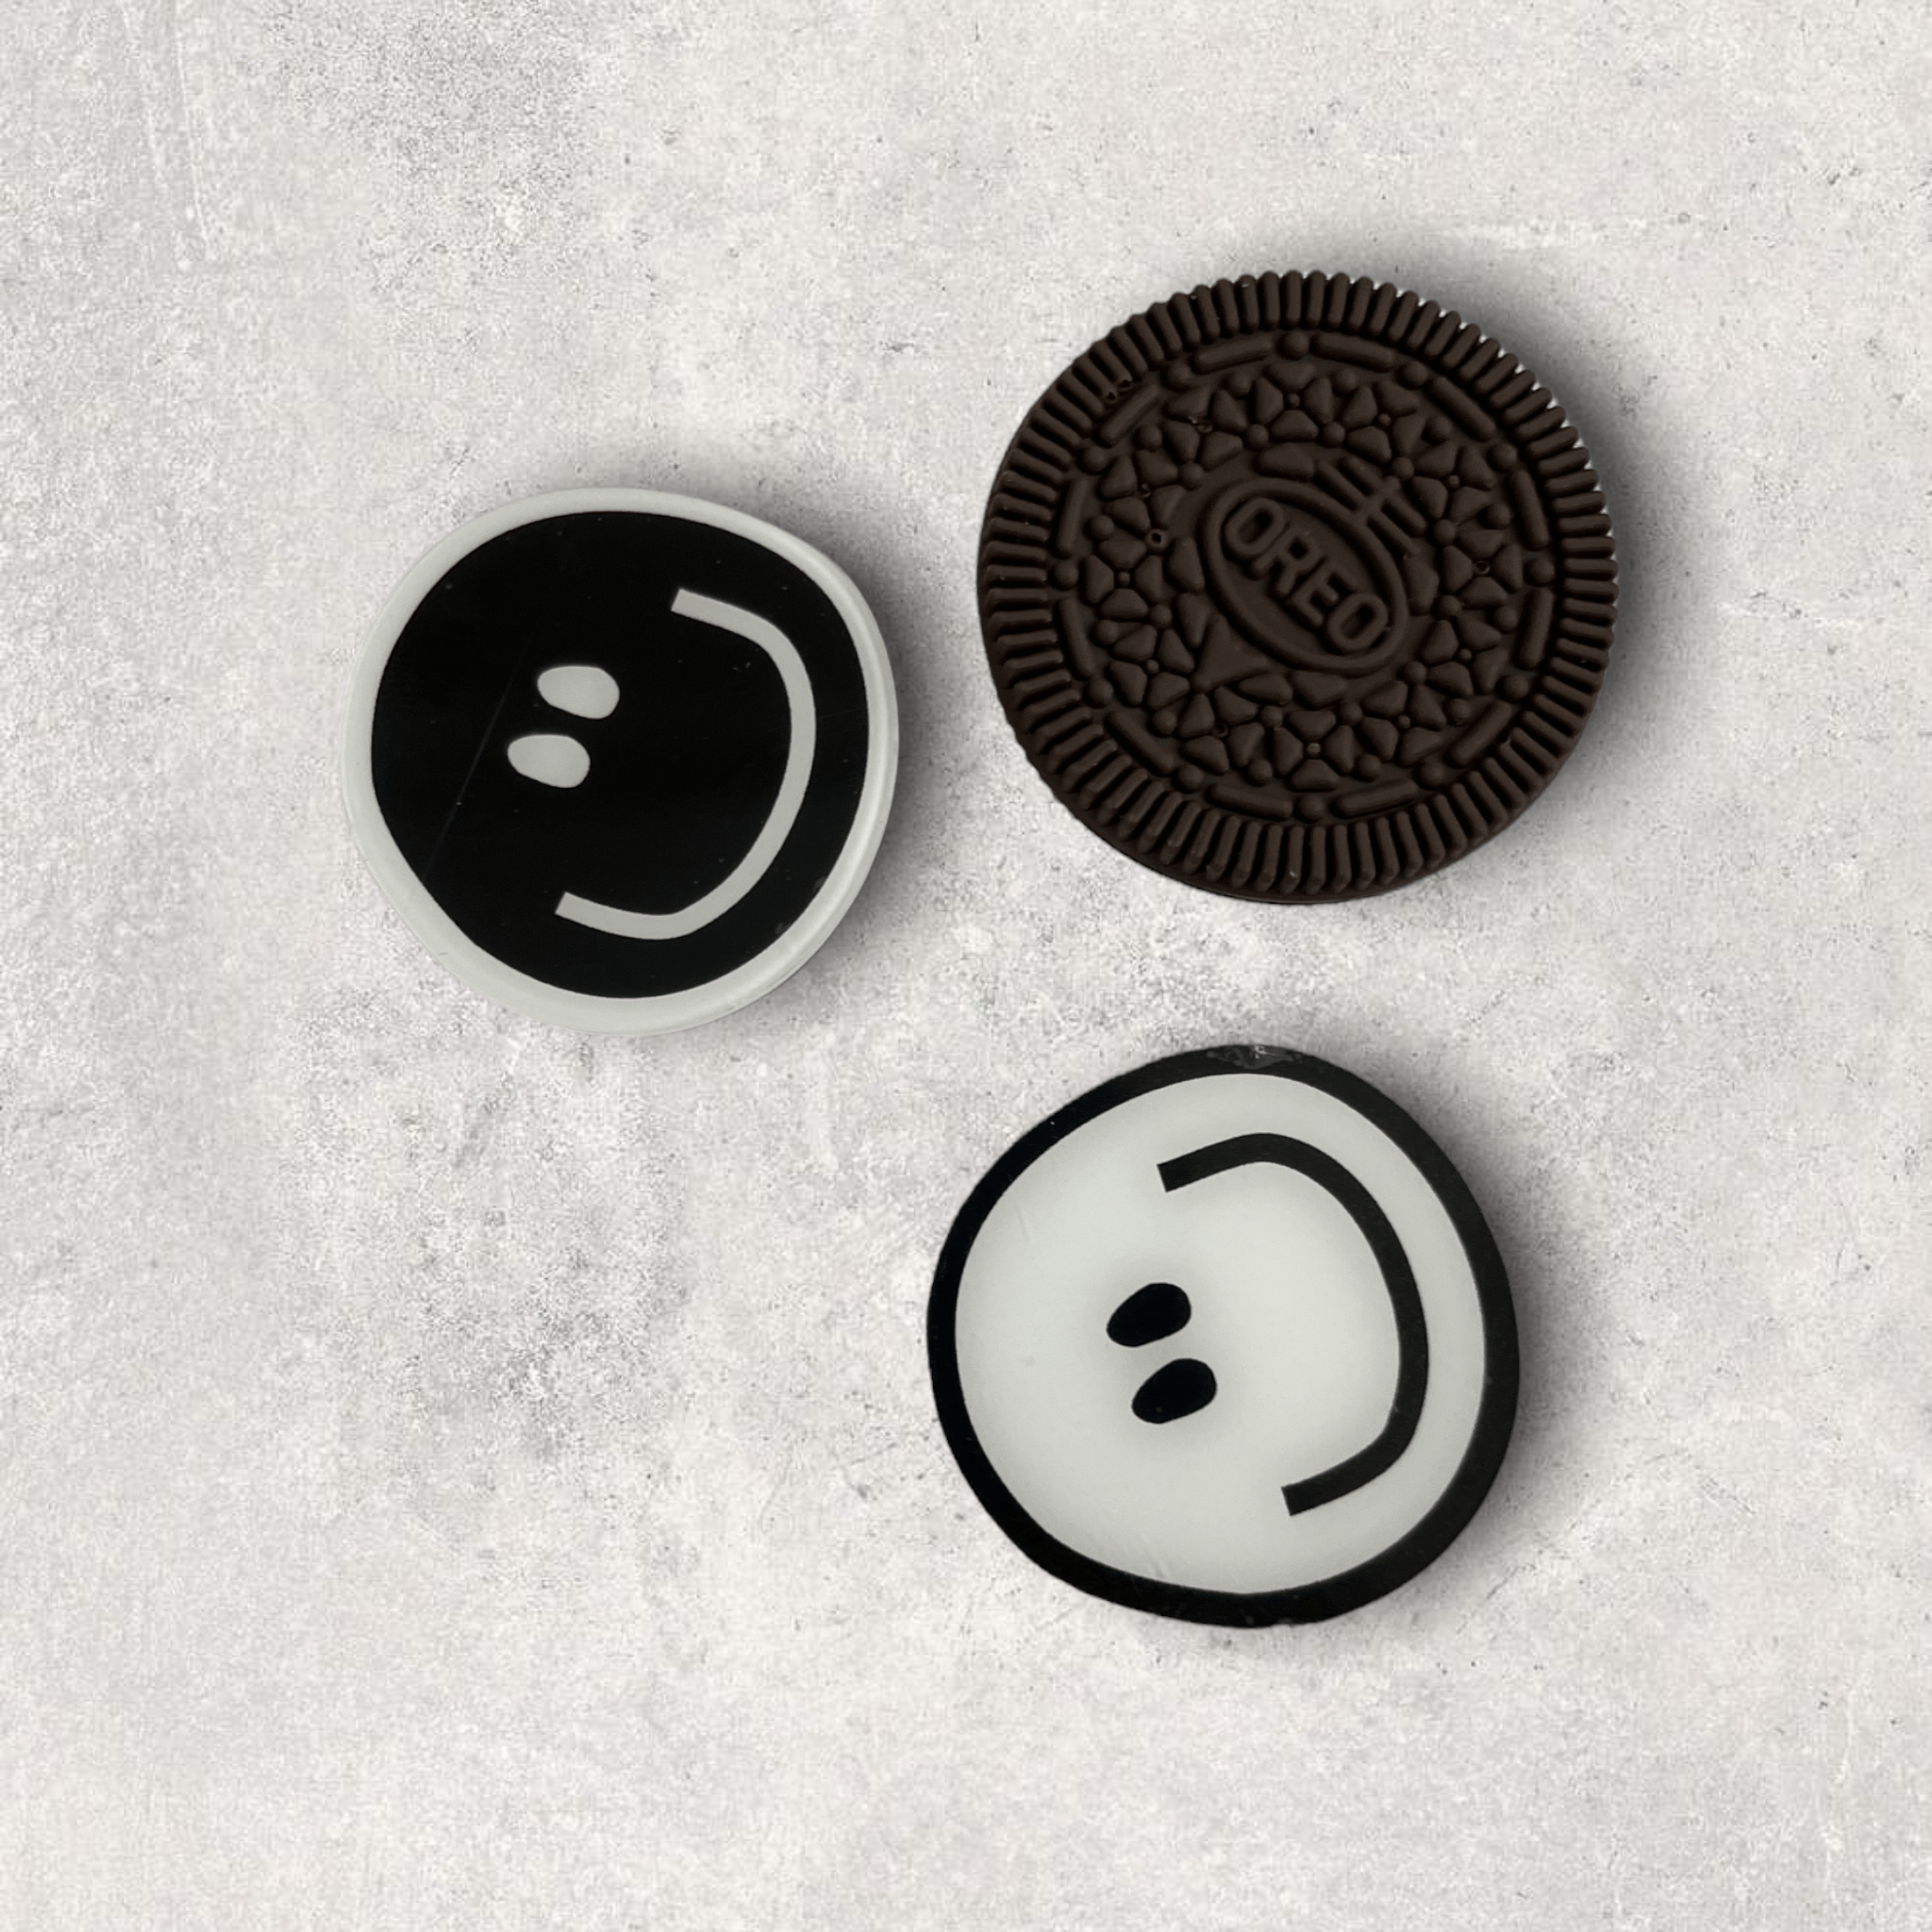 A cookie with a smiley face on it - Oreo